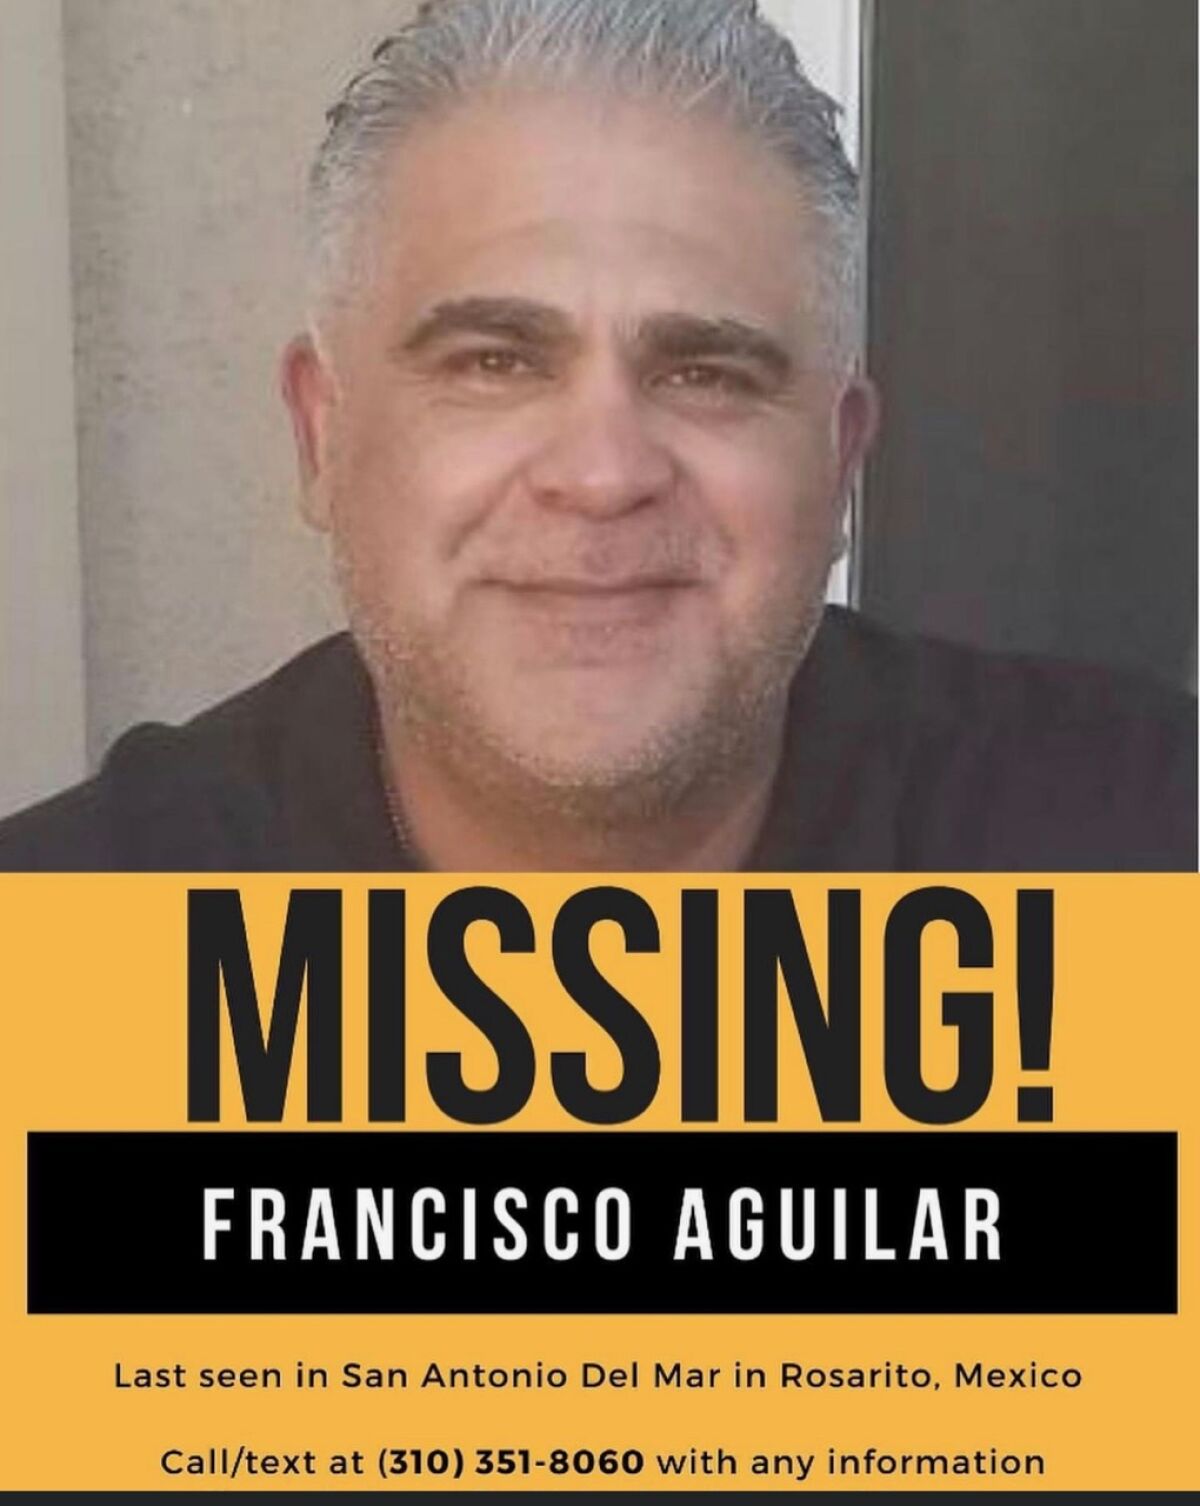 A flier says Francisco Aguilar is missing. 